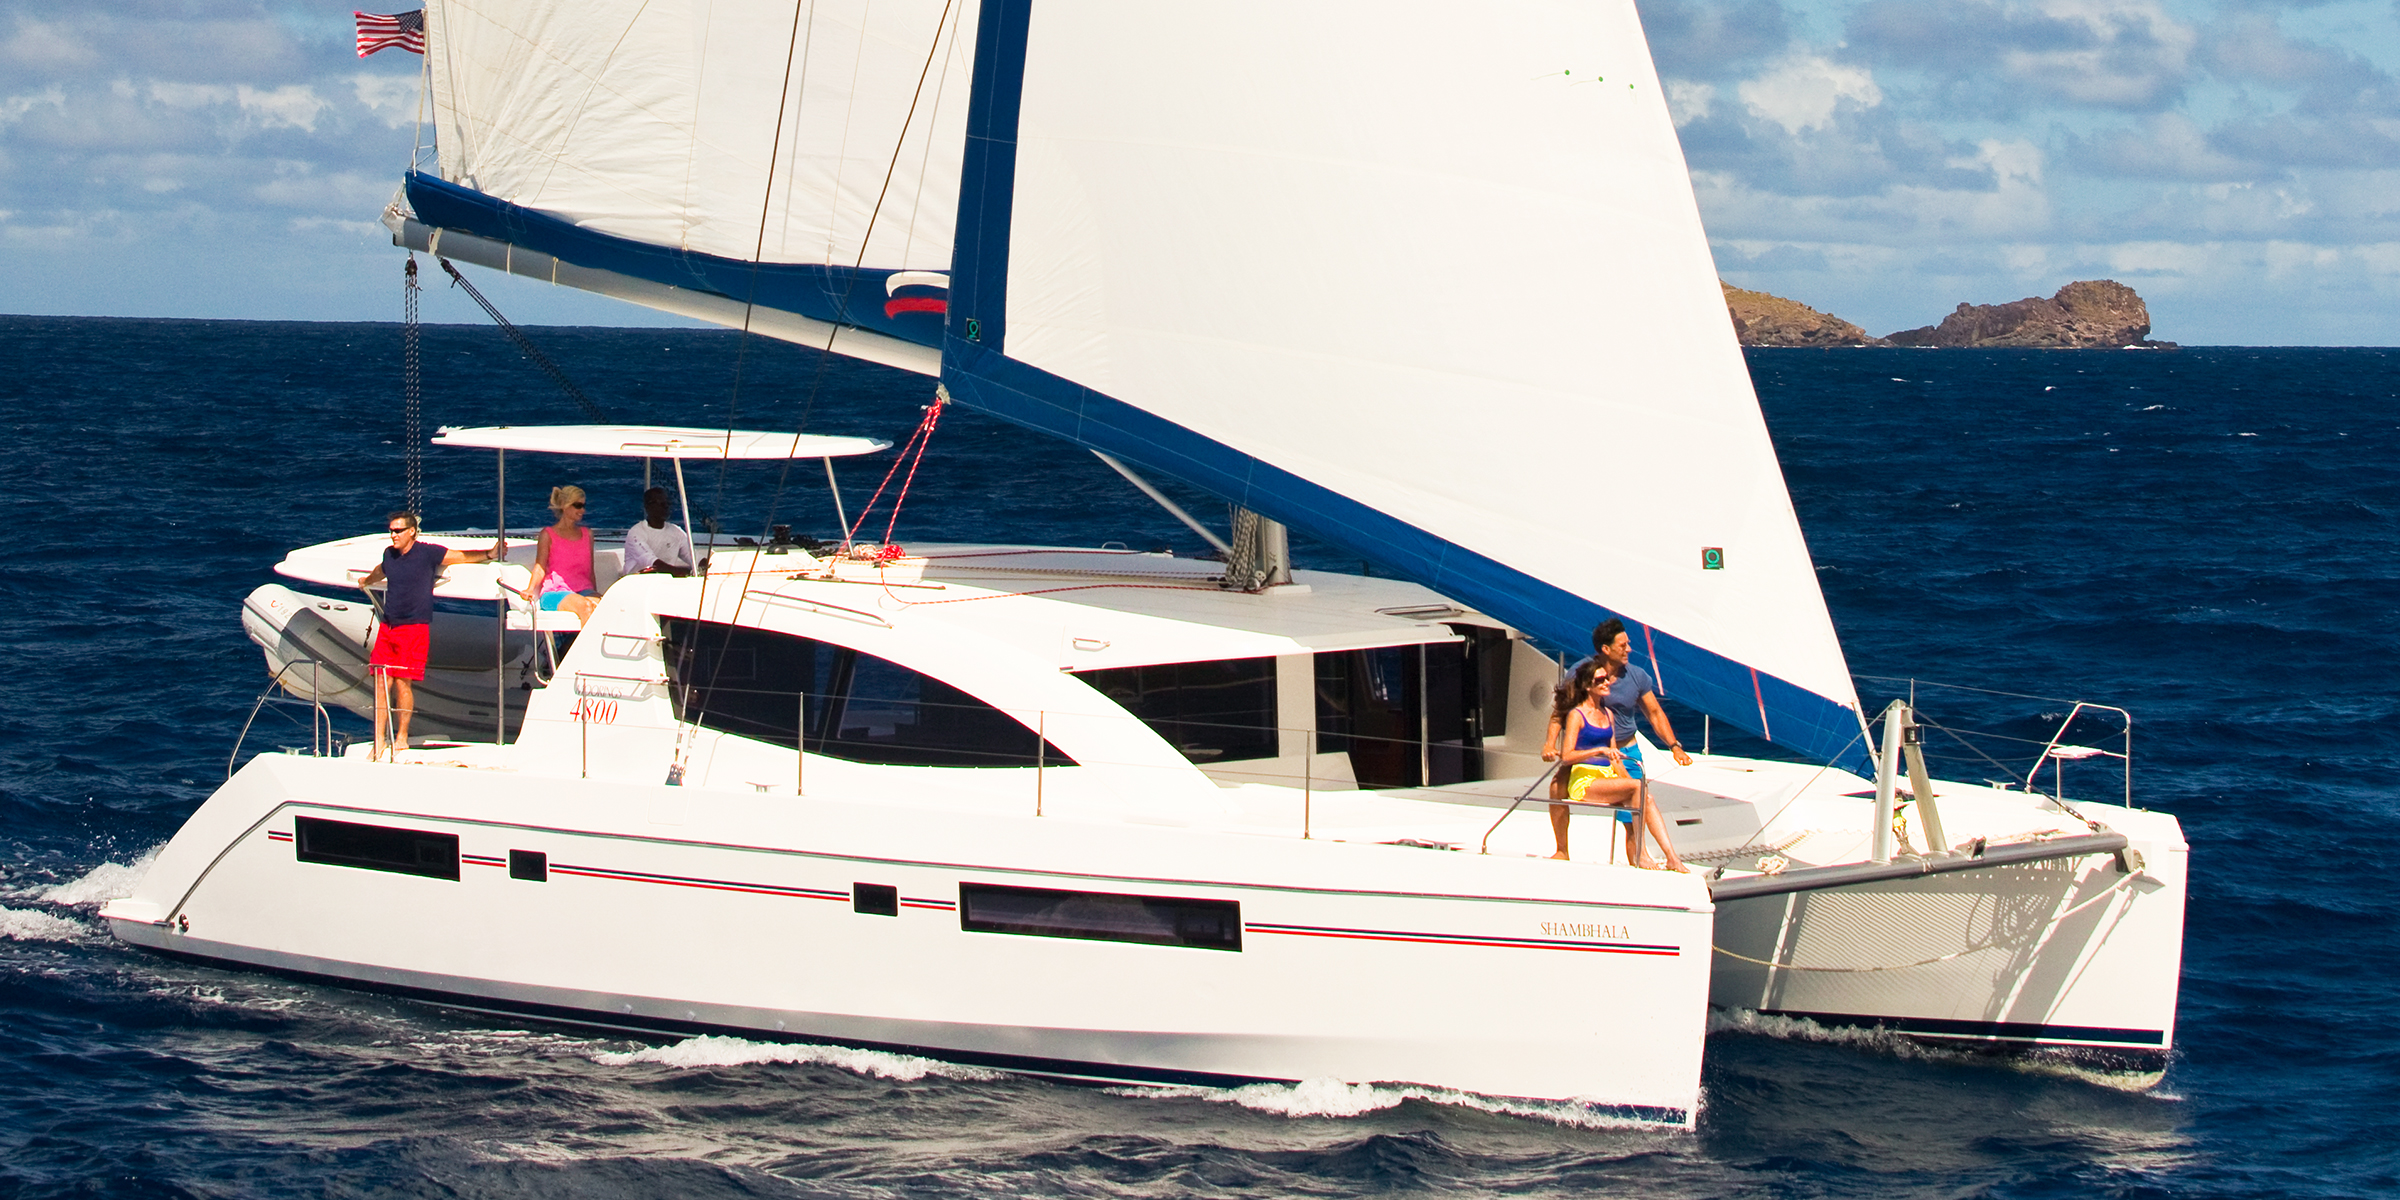 Leopard 48 - Yacht Charter Saint Lucia & Boat hire in St. Lucia Gros Islet Rodney Bay Marina 5